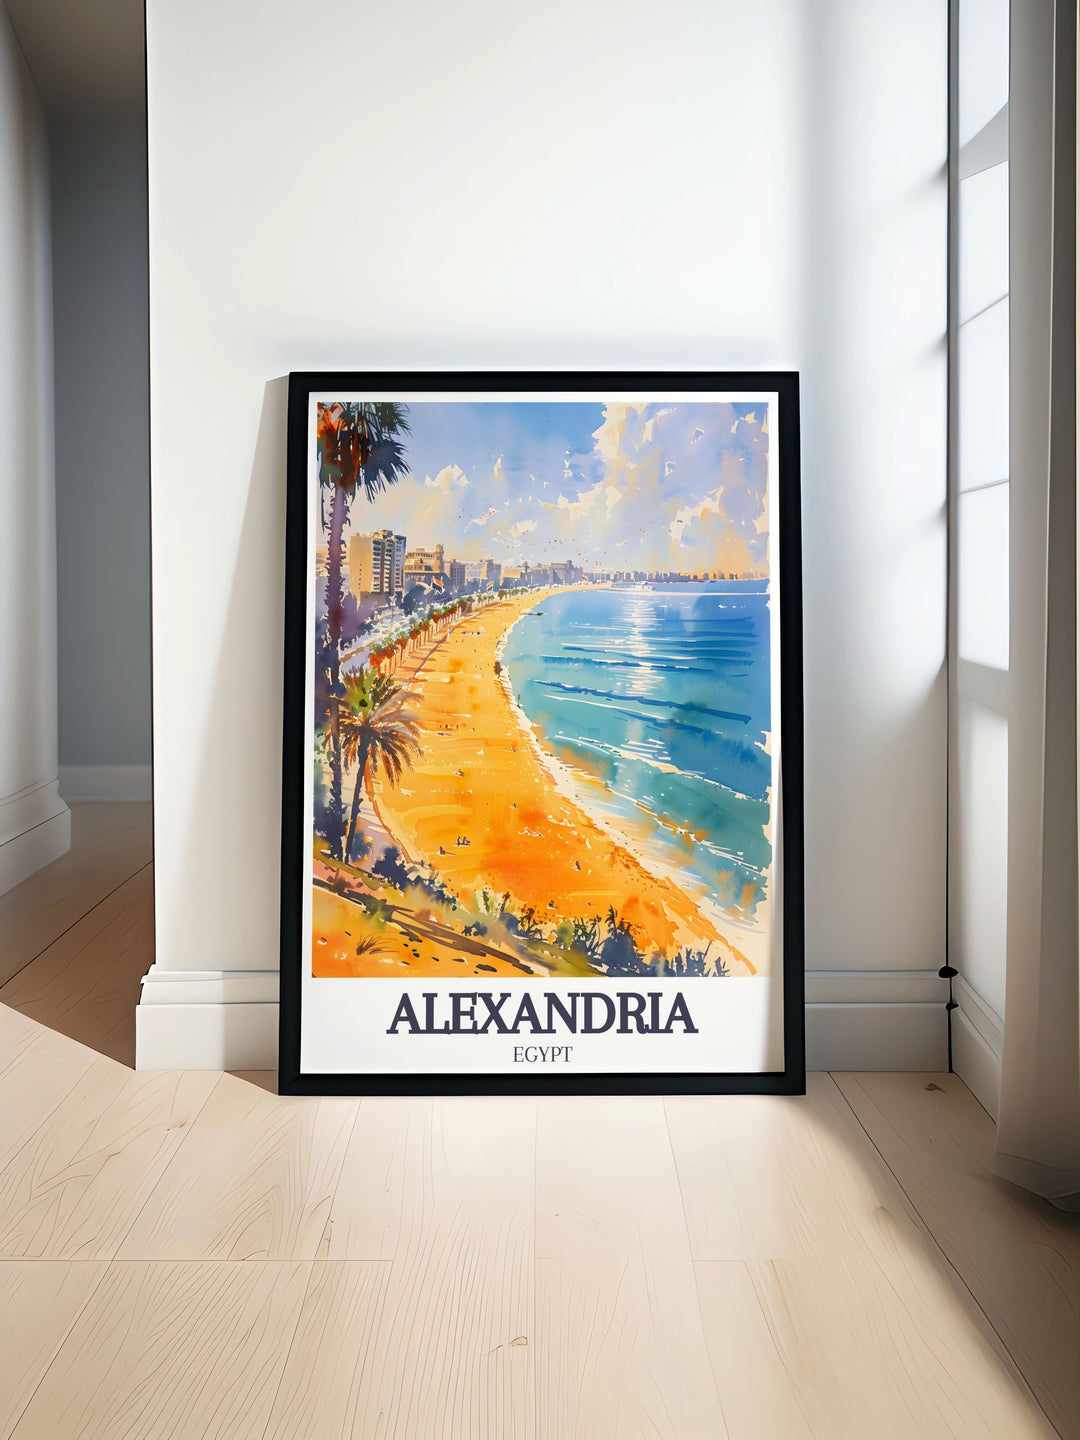 This vibrant Alexandria Egypt art print captures the beauty of Stanley Beach and Corniche Promenade. Perfect for home decor, the fine line print showcases the iconic landmarks in vivid colors, adding elegance and sophistication to any space.